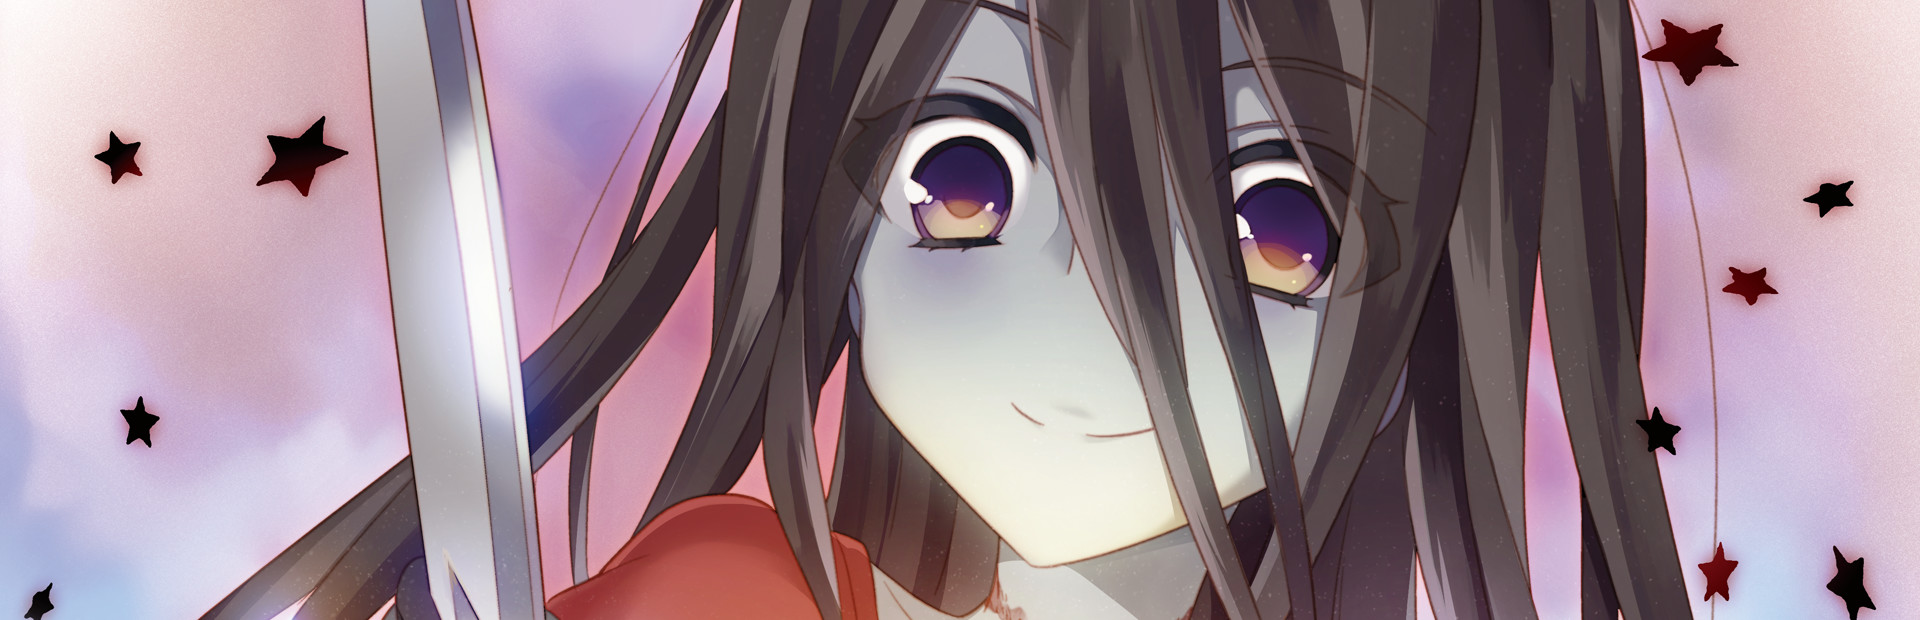 Corpse Party: Sweet Sachiko's Hysteric Birthday Bash cover image